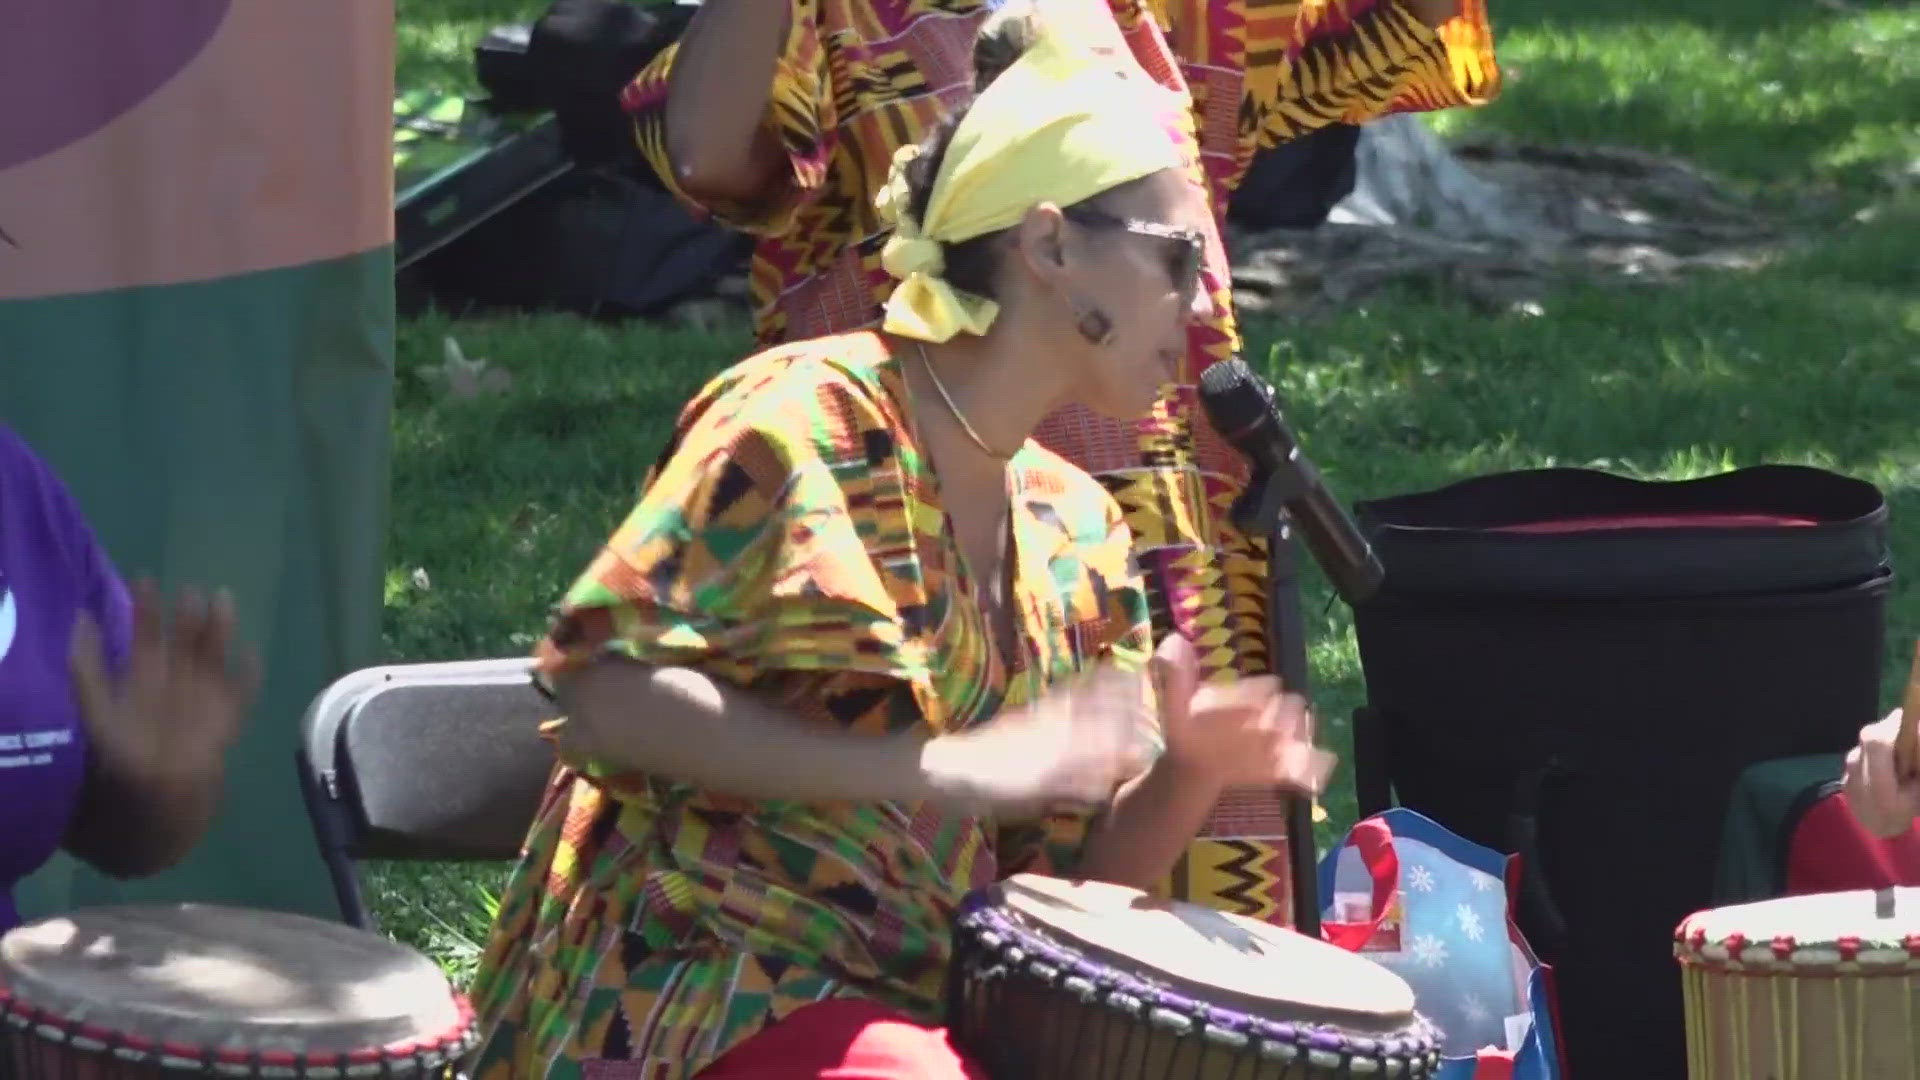 From Placer and Sacramento counties to other spots throughout Northern California, Juneteenth celebrations began this weekend.